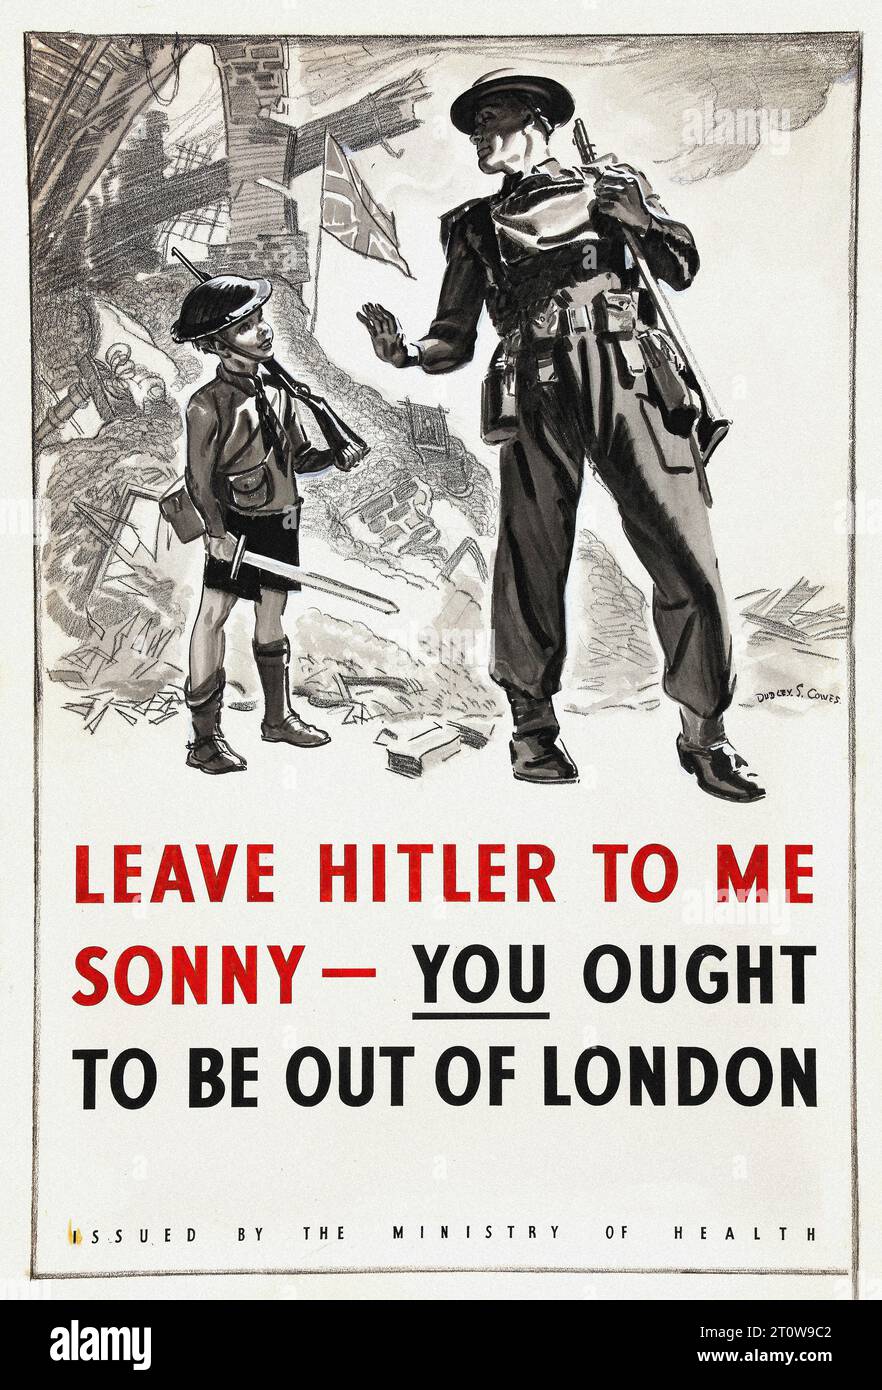 British propaganda , World War II era - “Leave Hitler to me Sonny - you ought to be out of London”   This is a British propaganda poster from World War II. It is in a graphic style with a black and white illustration of a man and a boy. The text is in English and is in a bold font. Stock Photo